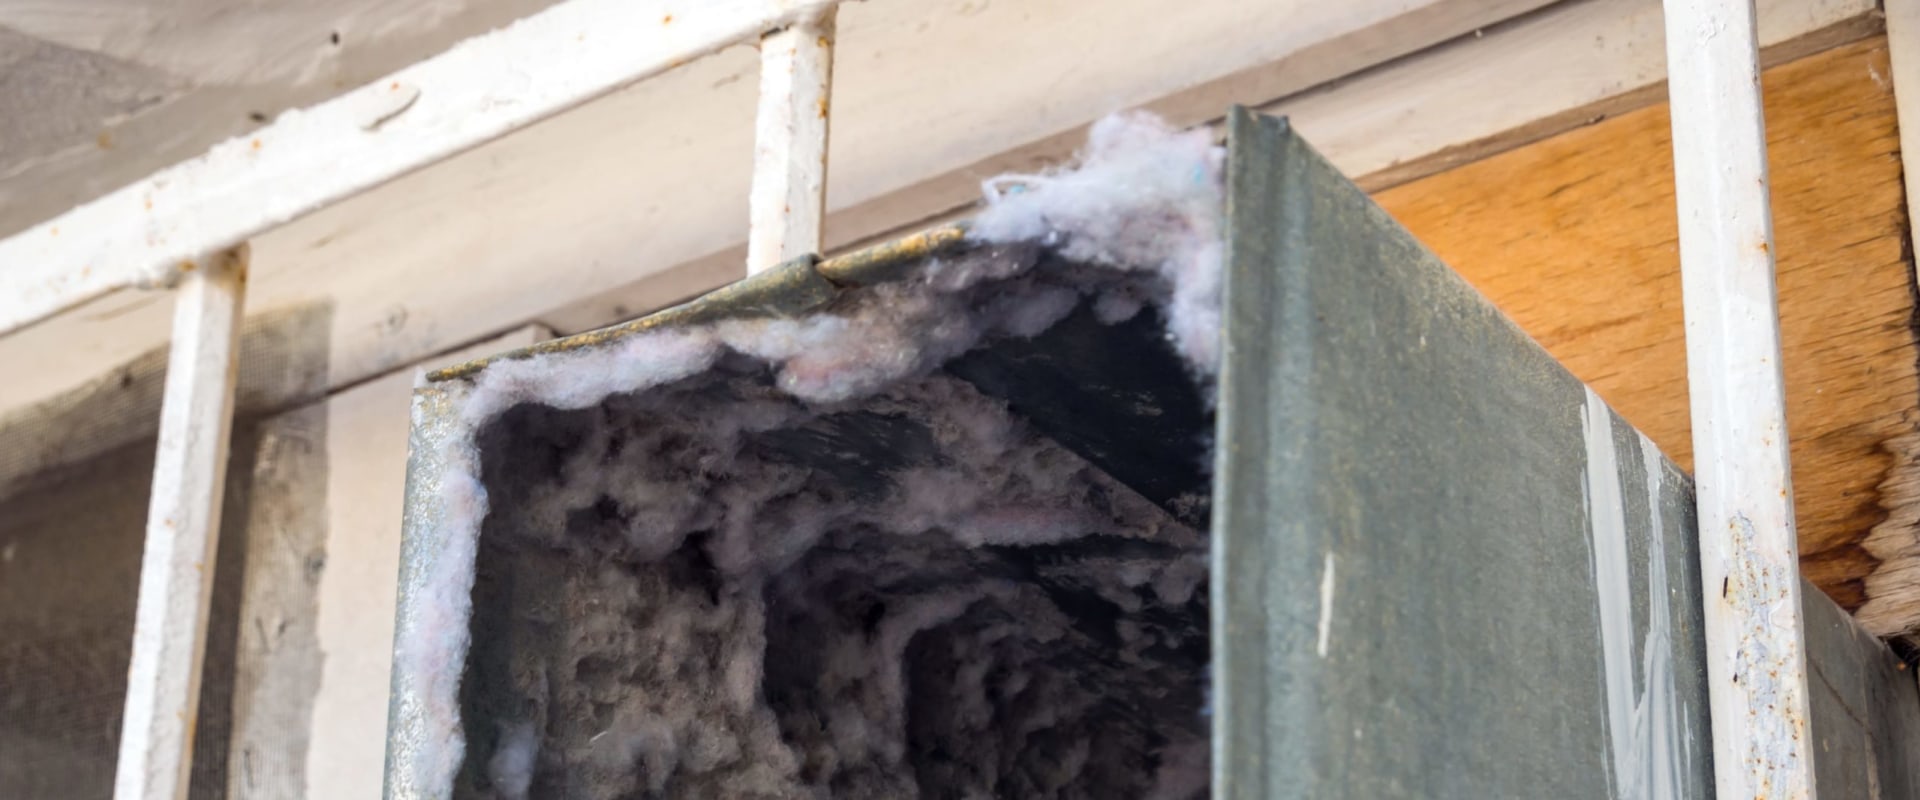 Can I Safely Clean My Vents with a Chemical Cleaner?